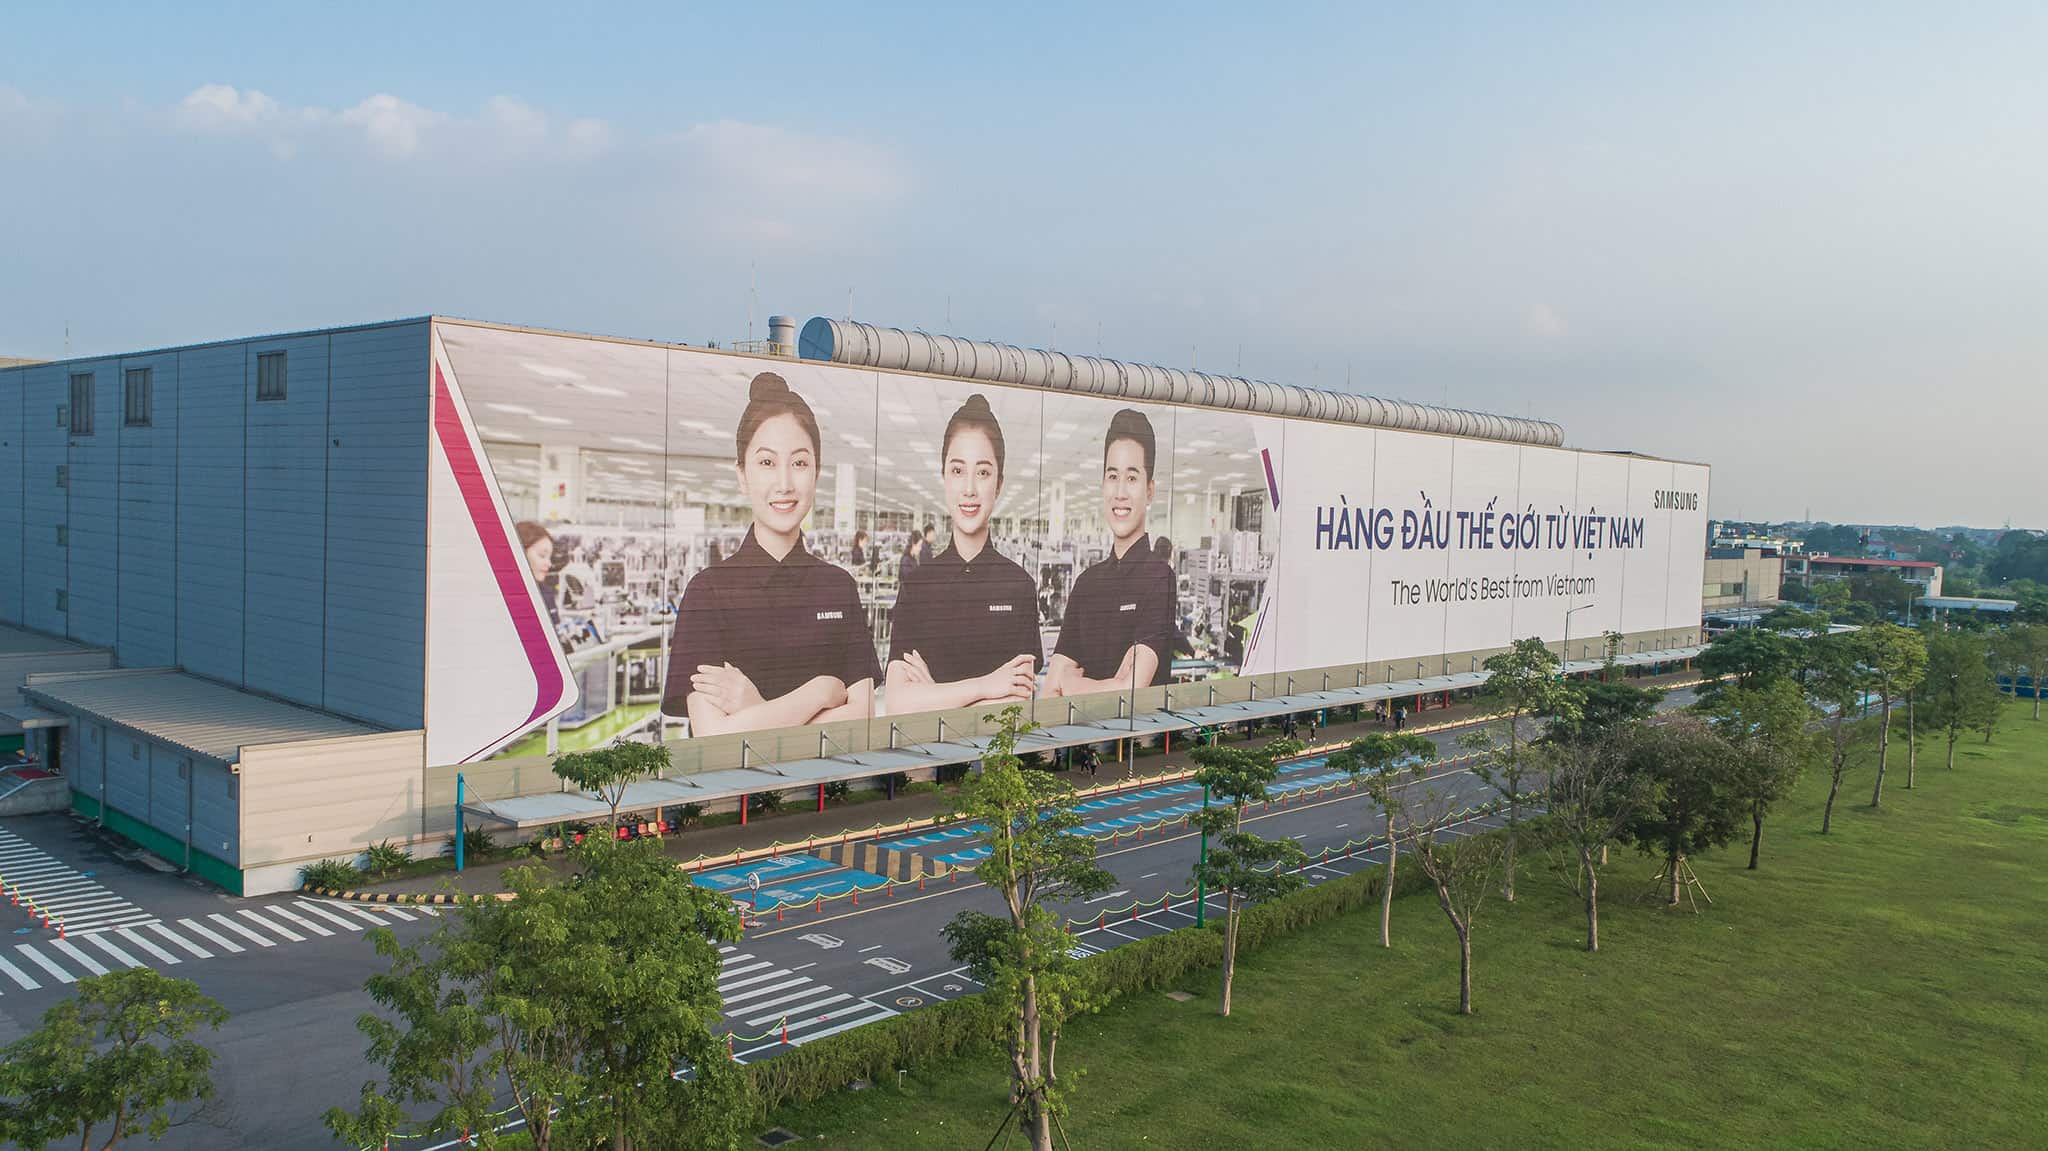 Samsung's investment in a factory in Thai Nguyen since 2013 has expanded its investment capital to USD 7.5 billion.